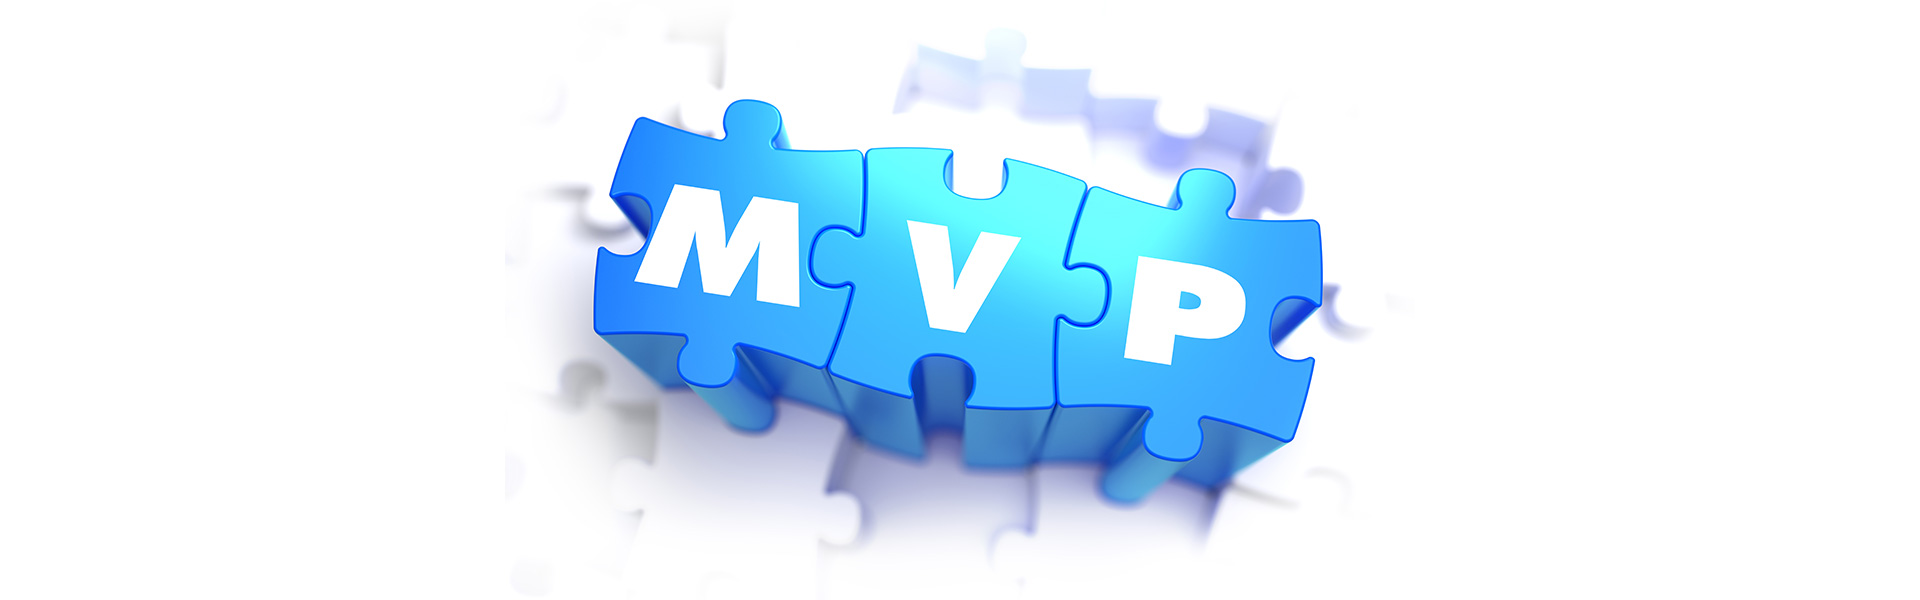 What is a Minimum Viable Product (MVP)?